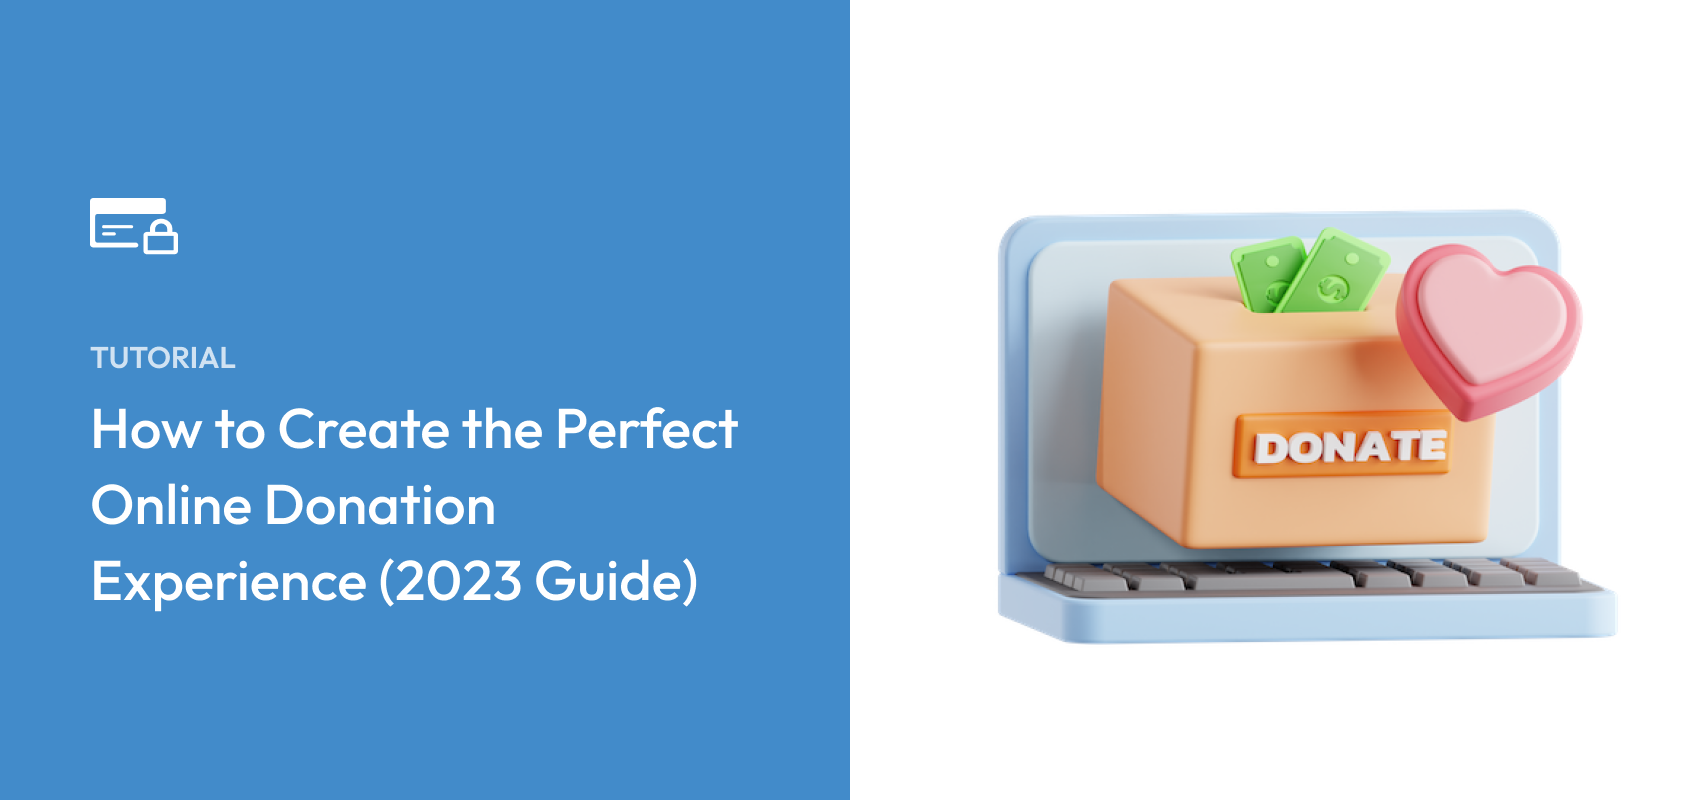 How to Create the Perfect Online Donation Experience (2023 Guide)